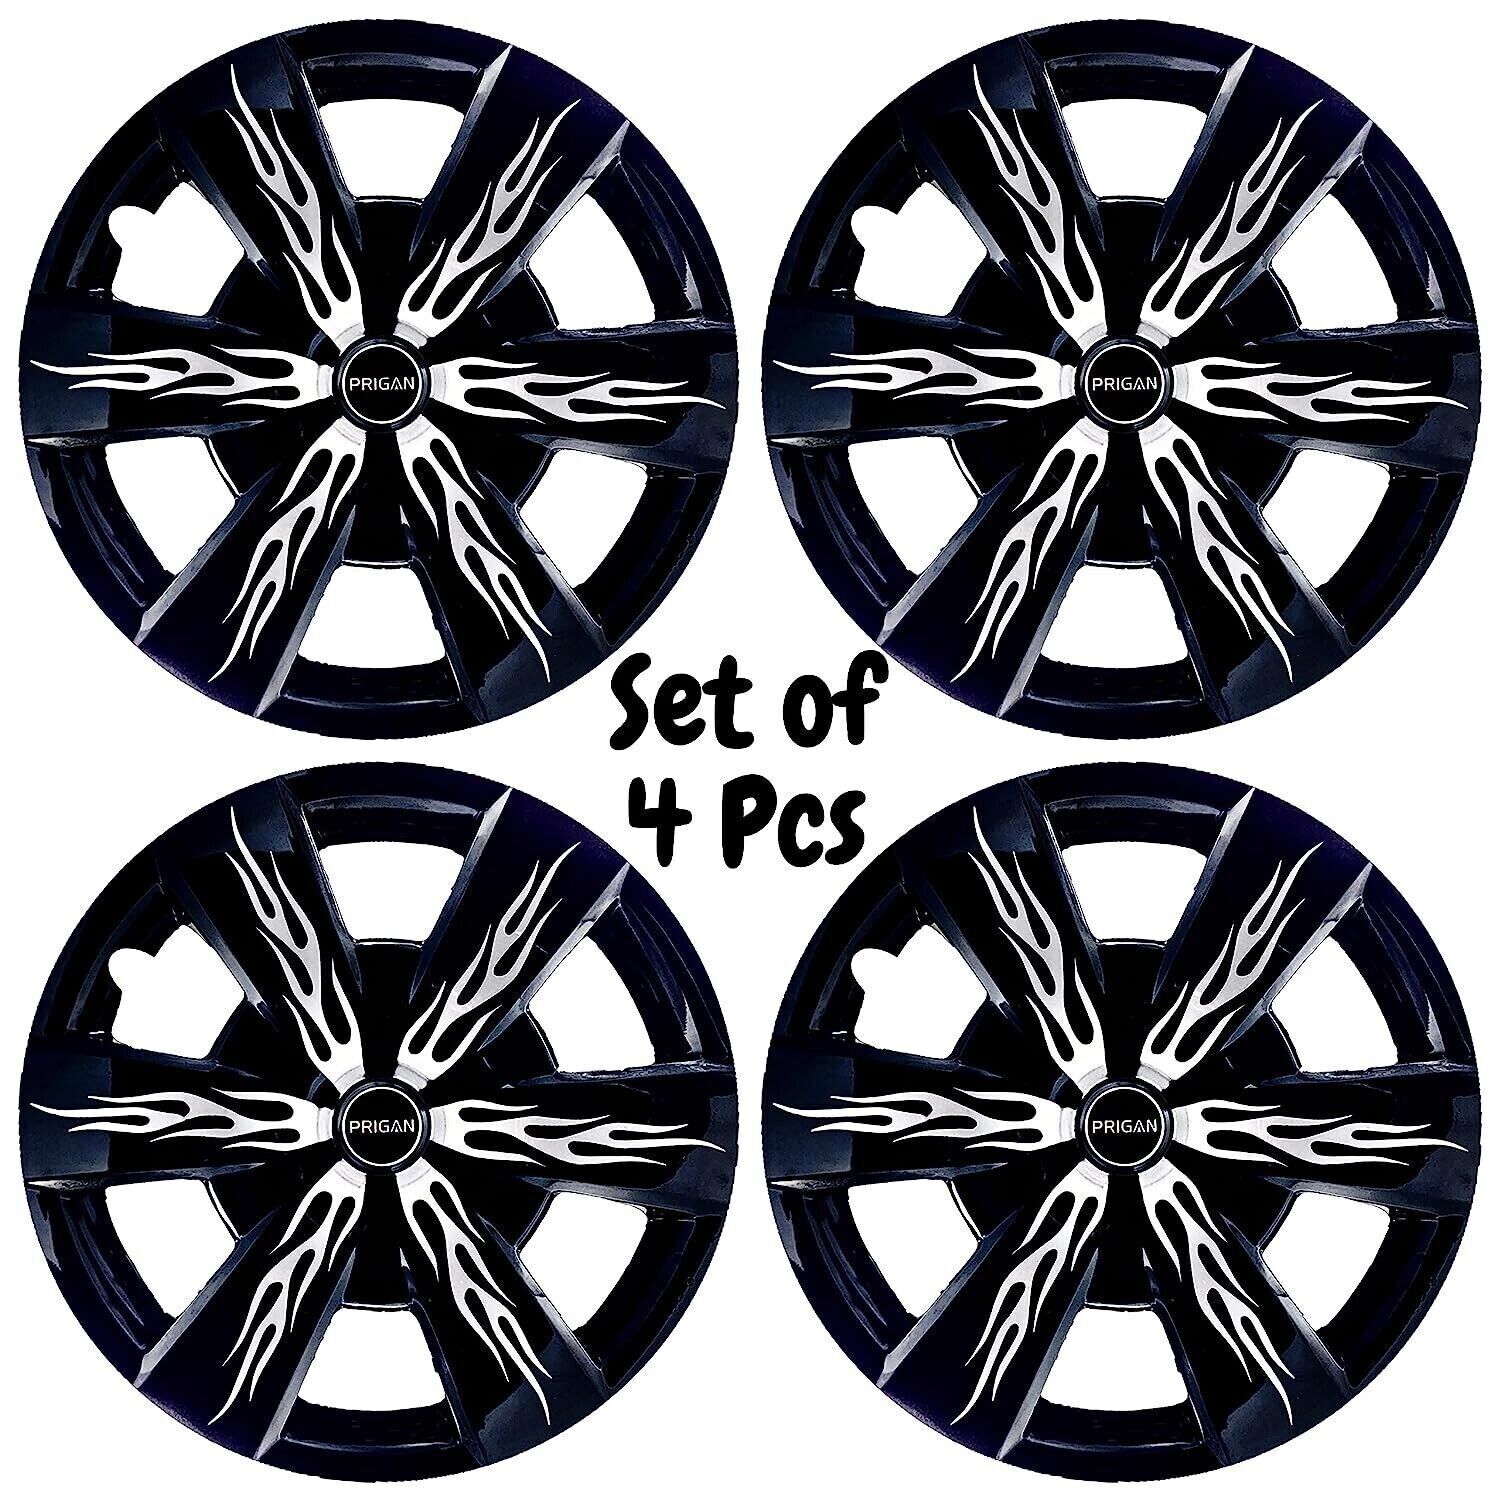 15 Inch Universal Silver Black Wheel Cover/Cap Fit For All 15 Inch Cars Firebolt